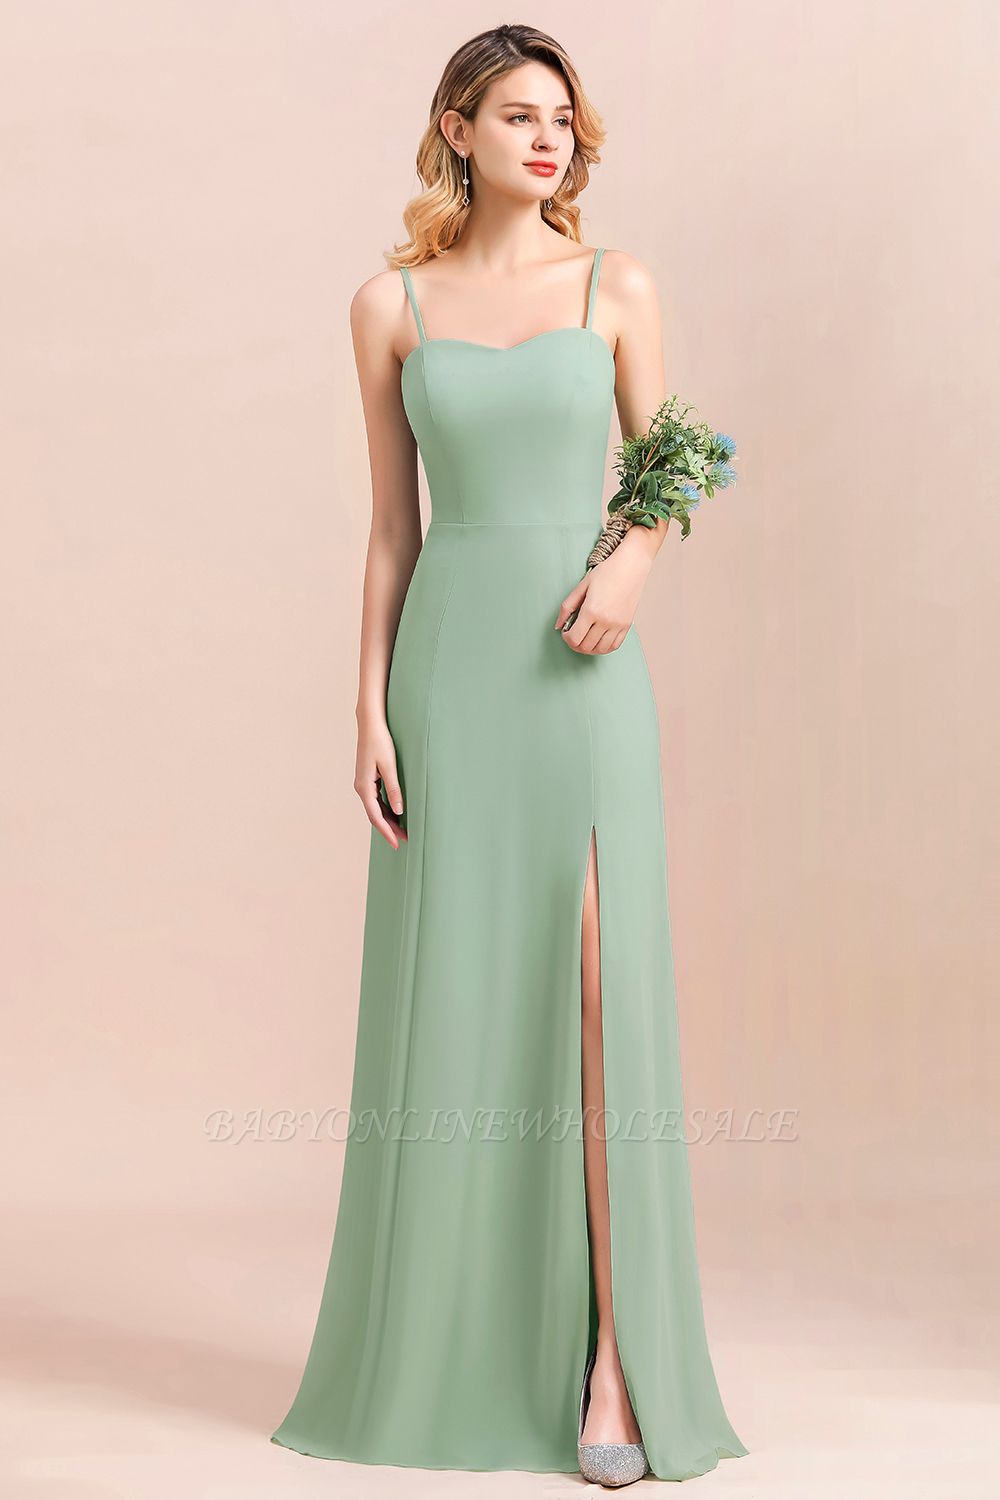 Romantic Sweetheart Sage Garden Bridesmaid DressSpaghetti Straps Long Special Occasion Dress with Side Slit